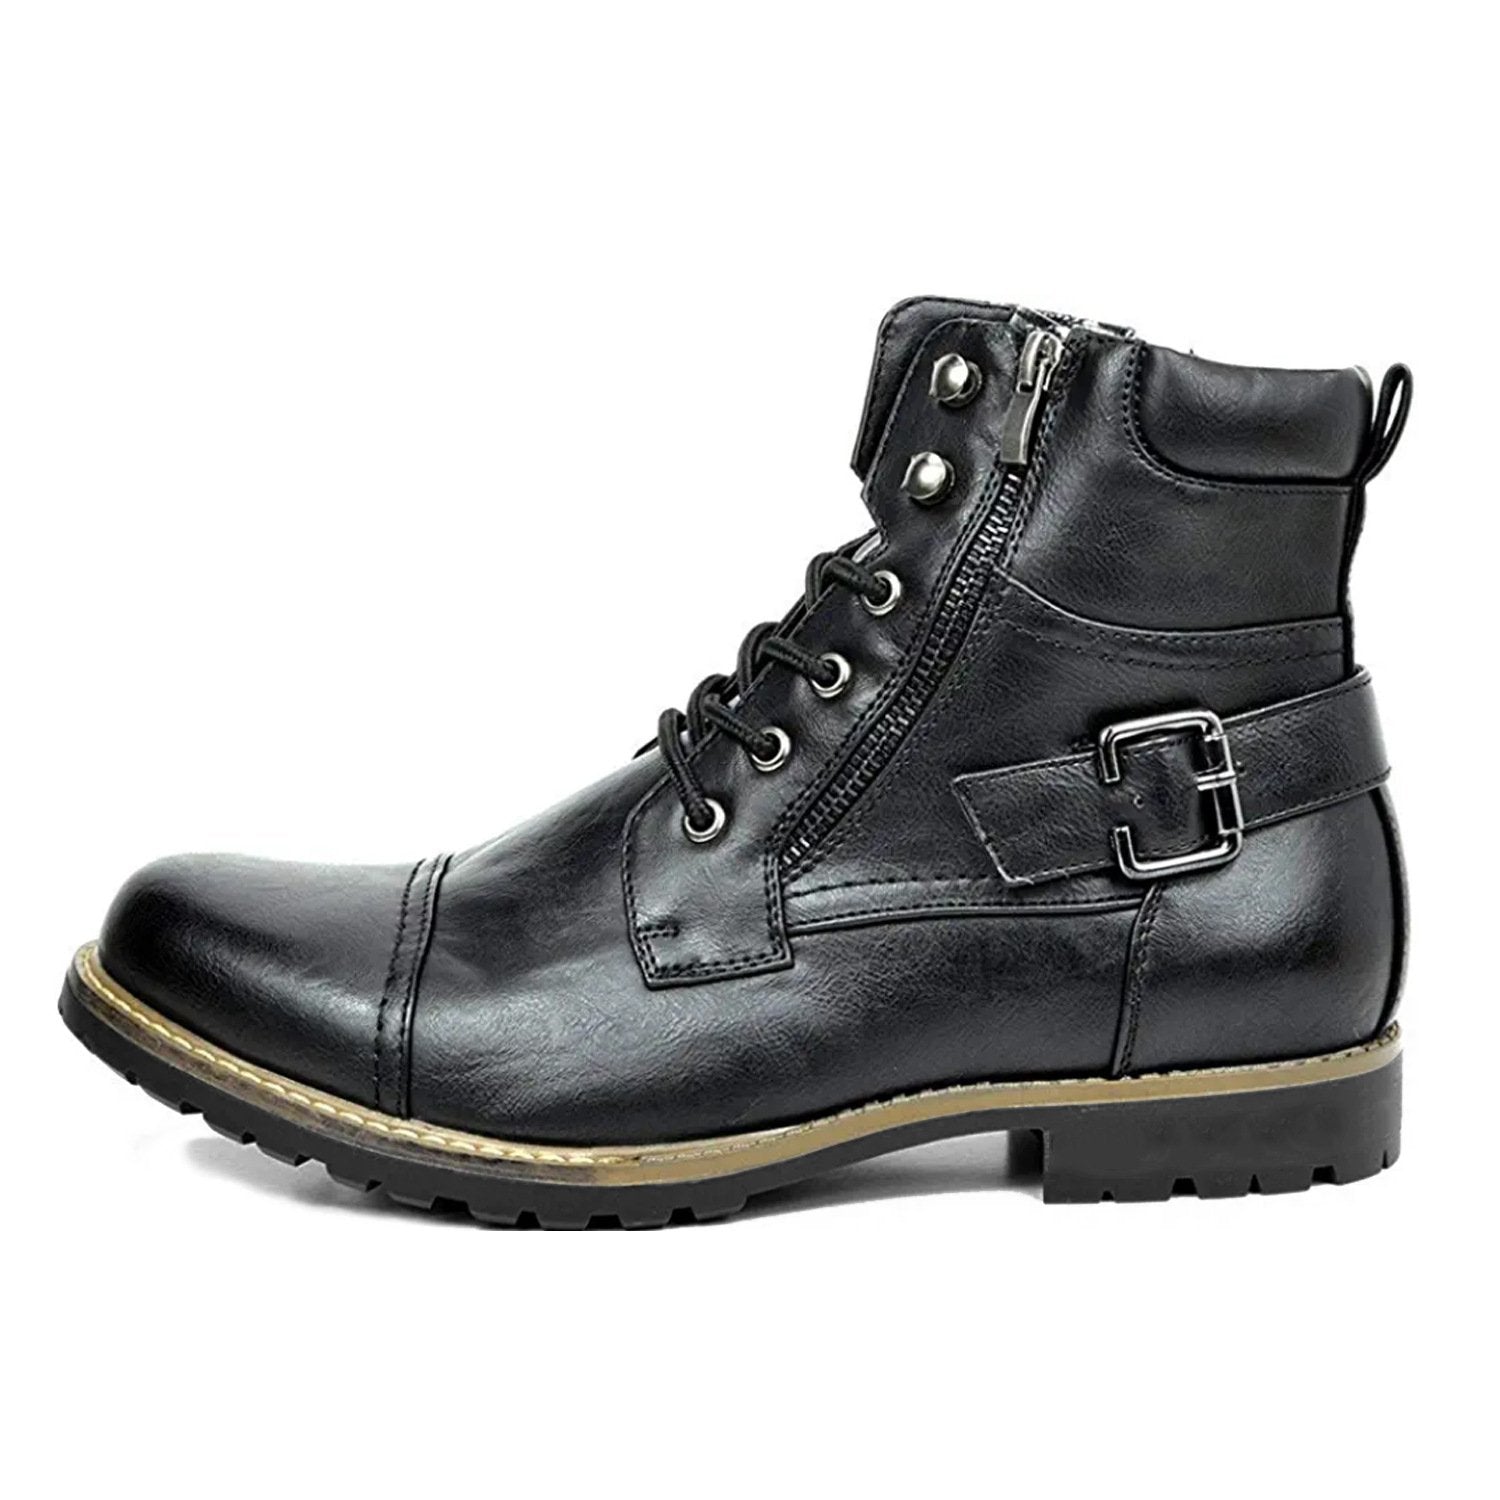 Men's Fashionable And Comfortable Genuine Leather Motorcycle Boots